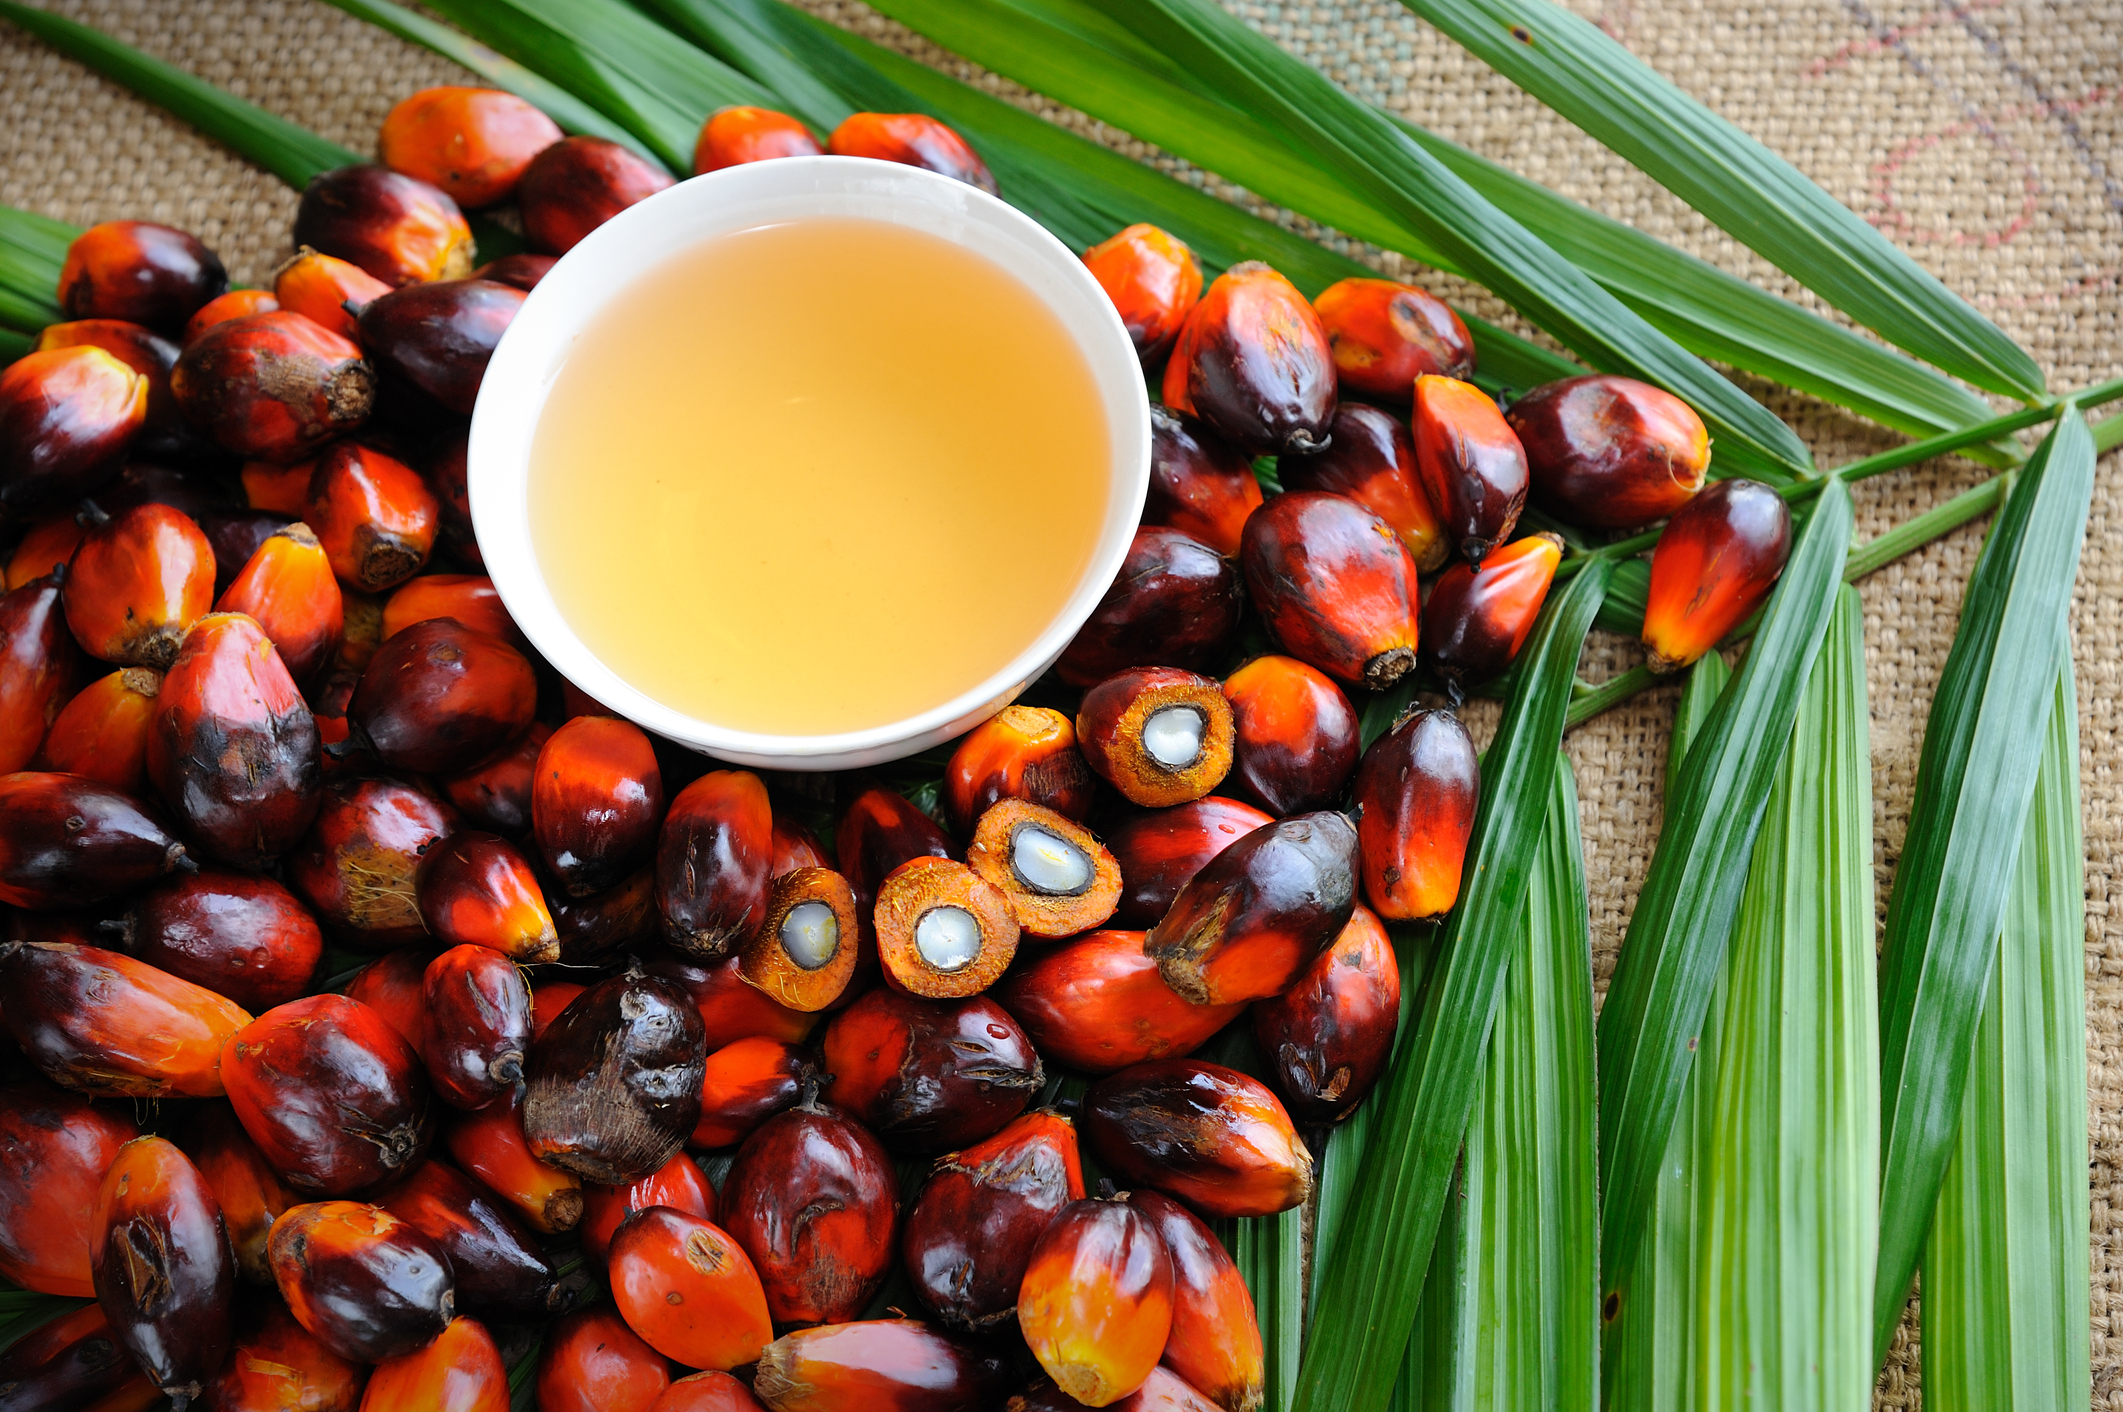 Cargill suspends business with Guatemalan palm oil supplier